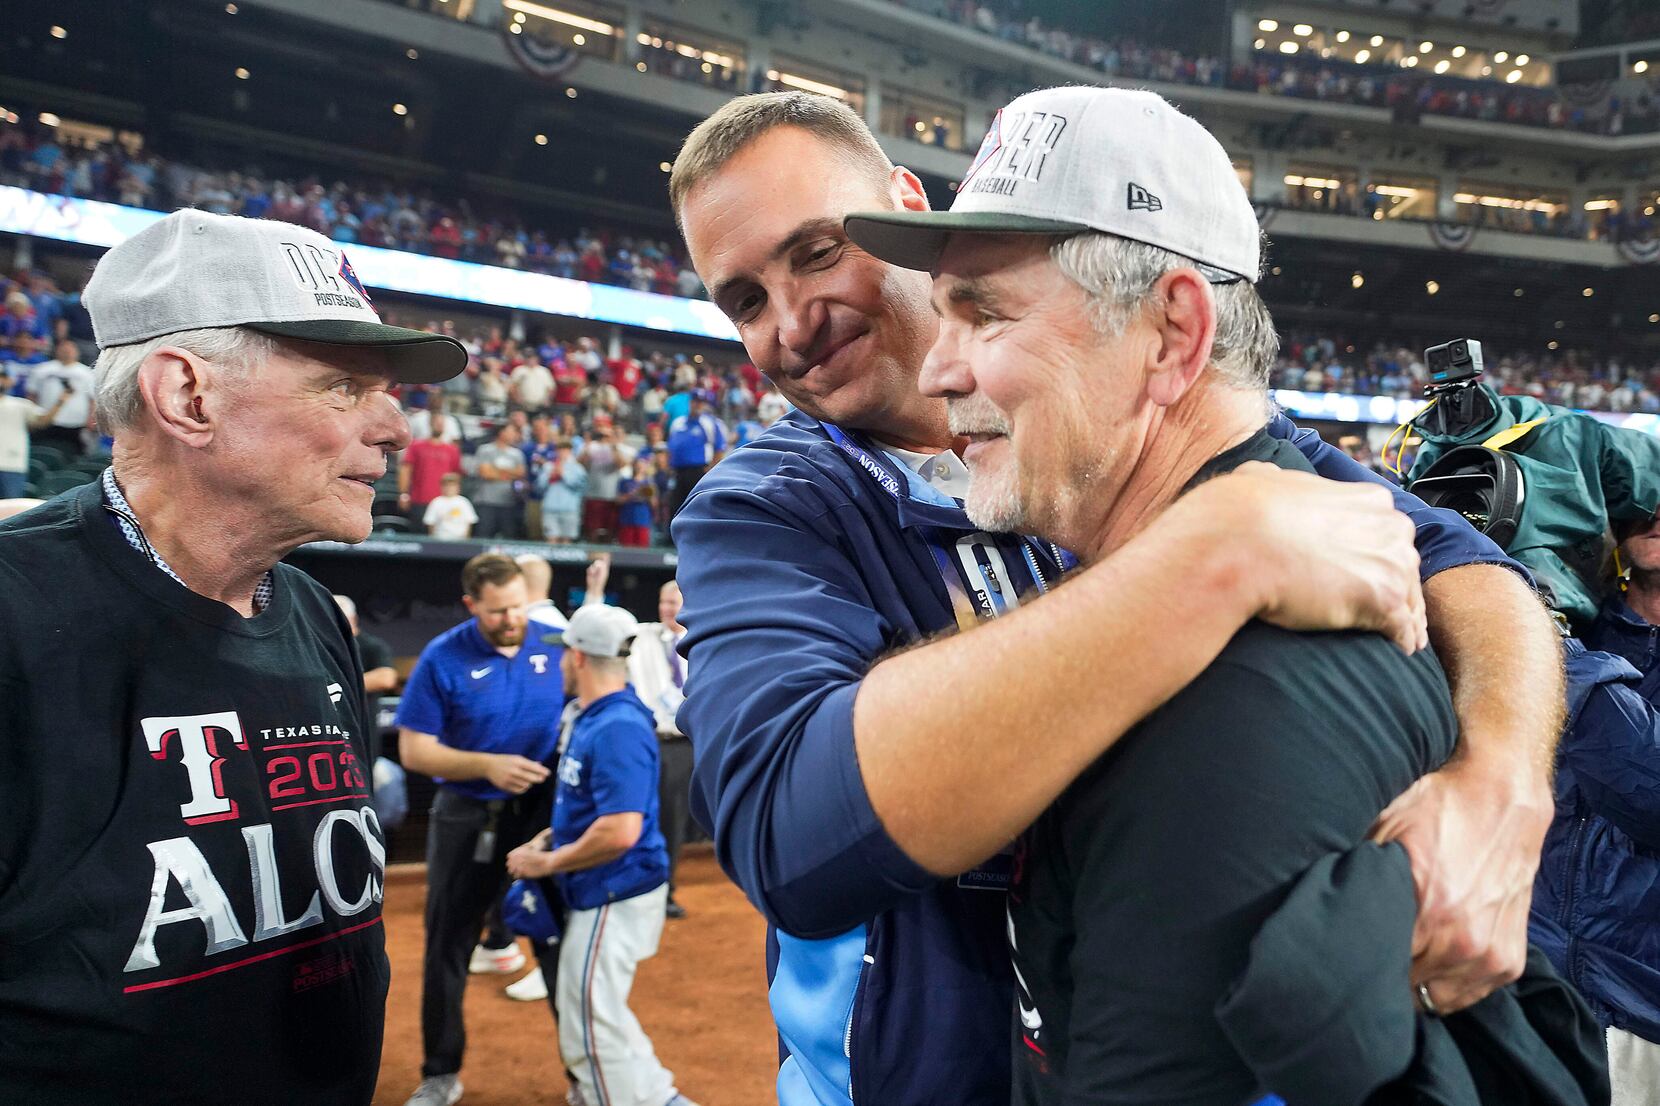 For Rangers, appeal of Bruce Bochy goes far beyond World Series